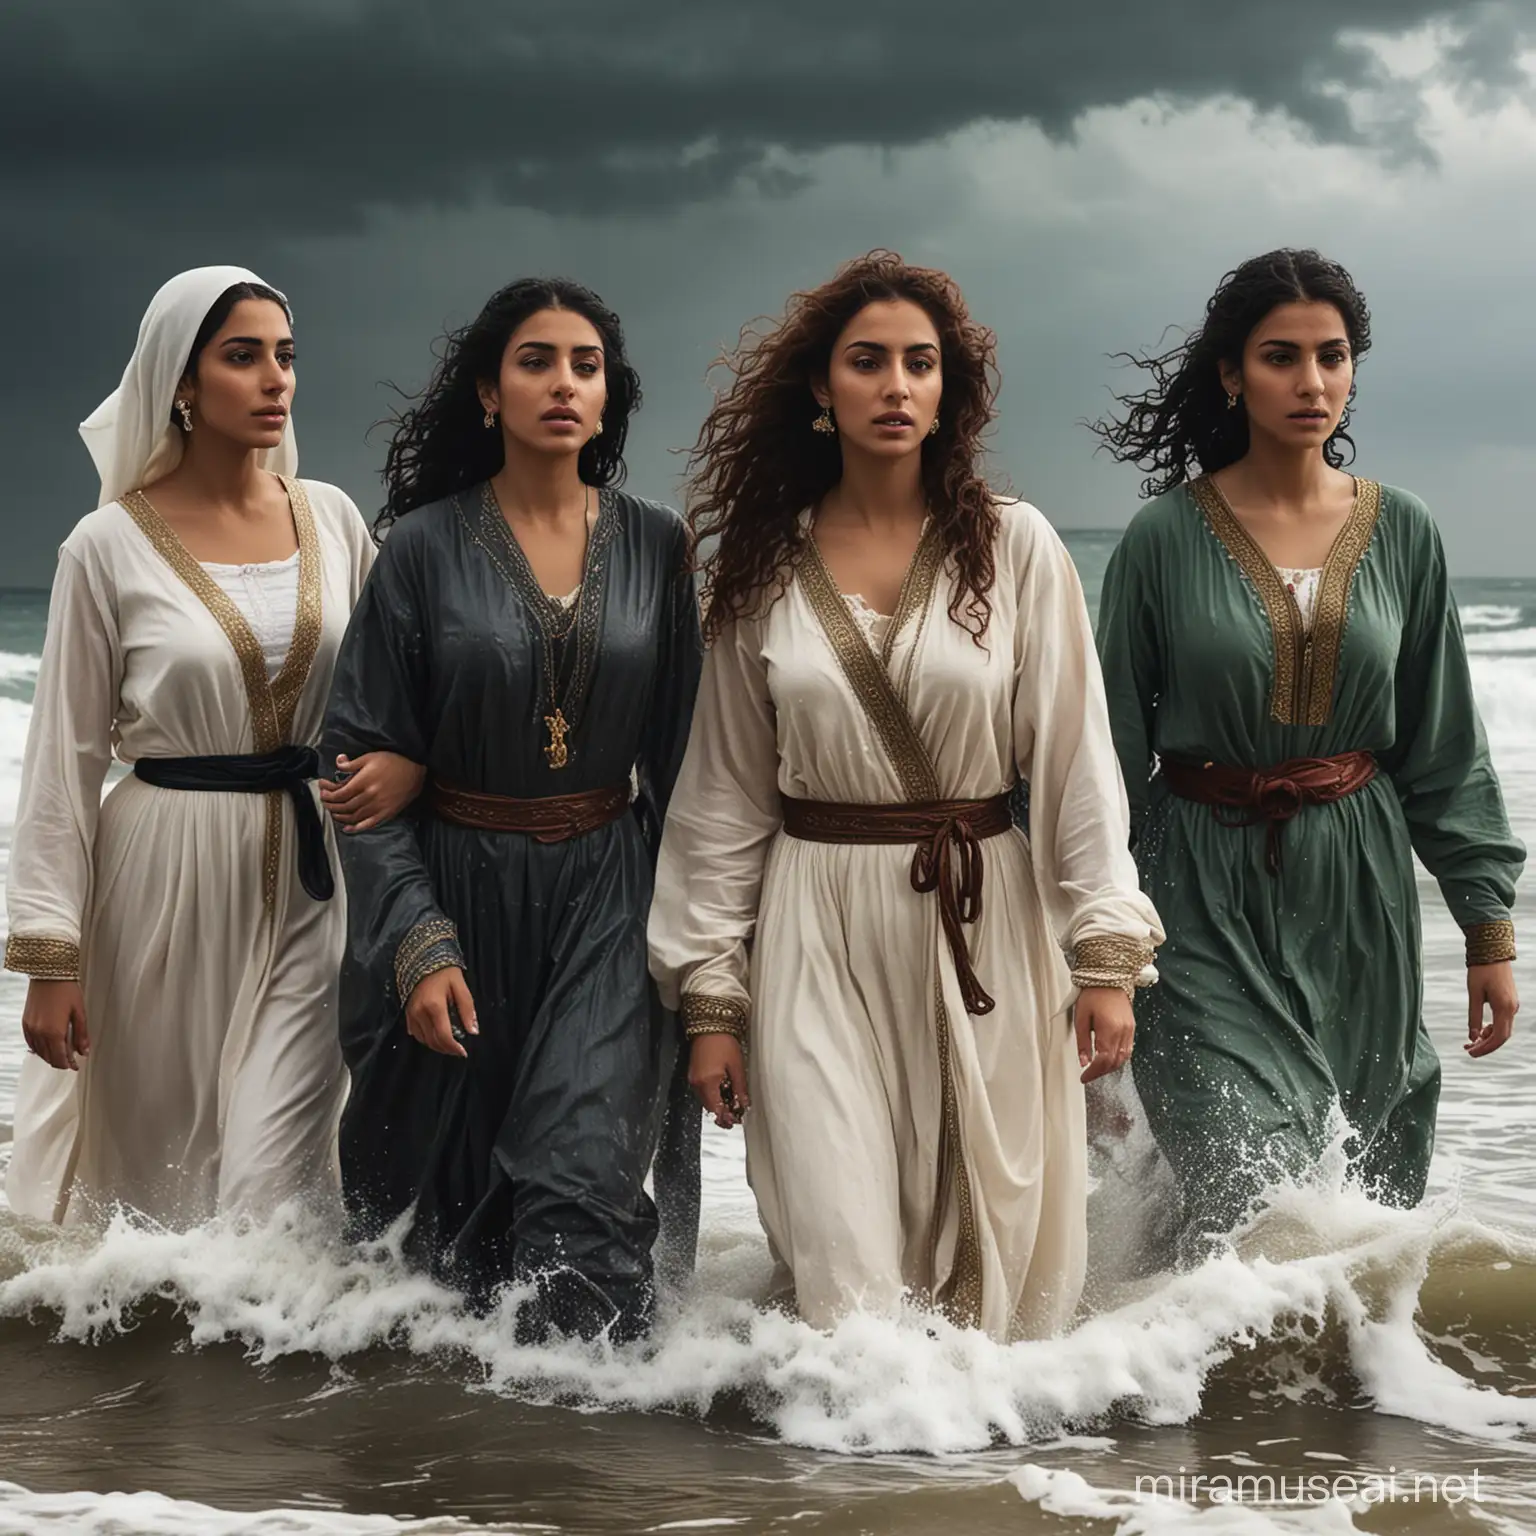 Arab Women in European Fashion Emerging from Turbulent Waves with Resolute and Graceful Expressions